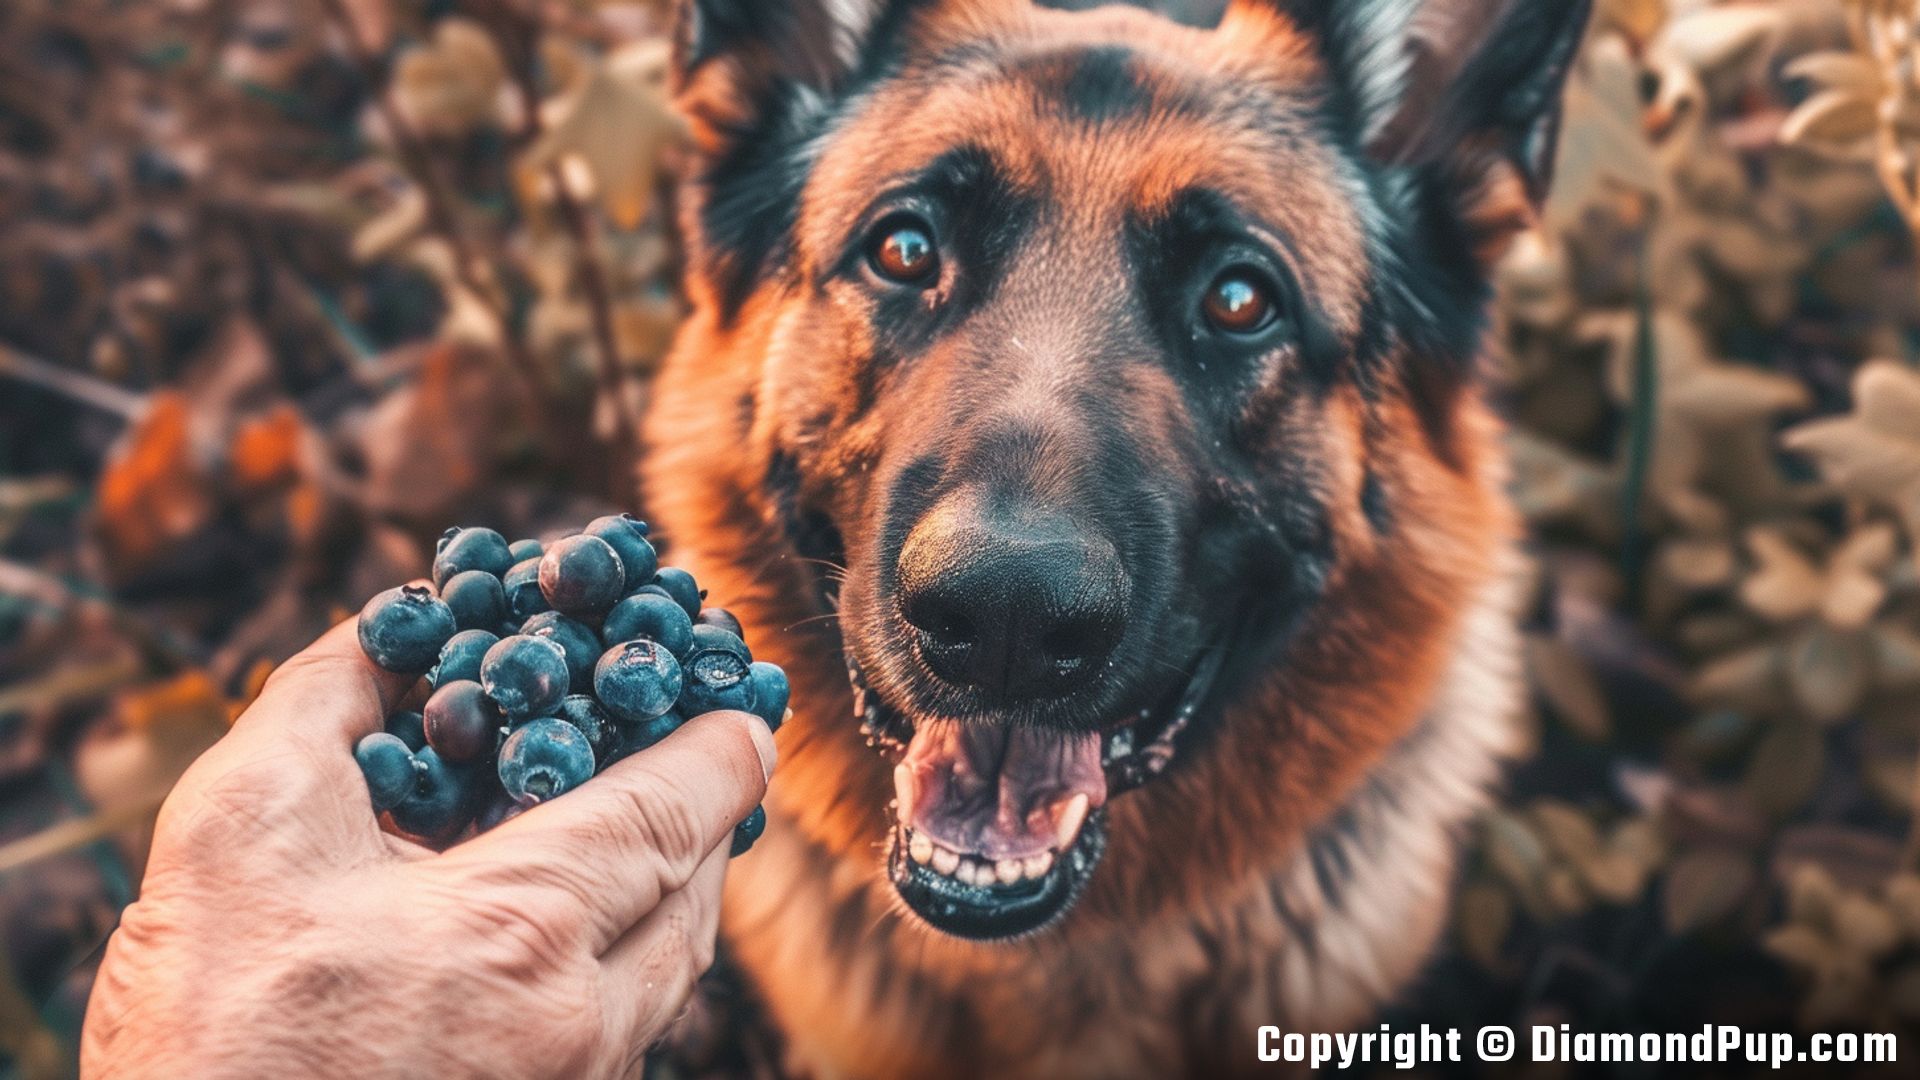 Photograph of a Cute German Shepherd Snacking on Blueberries